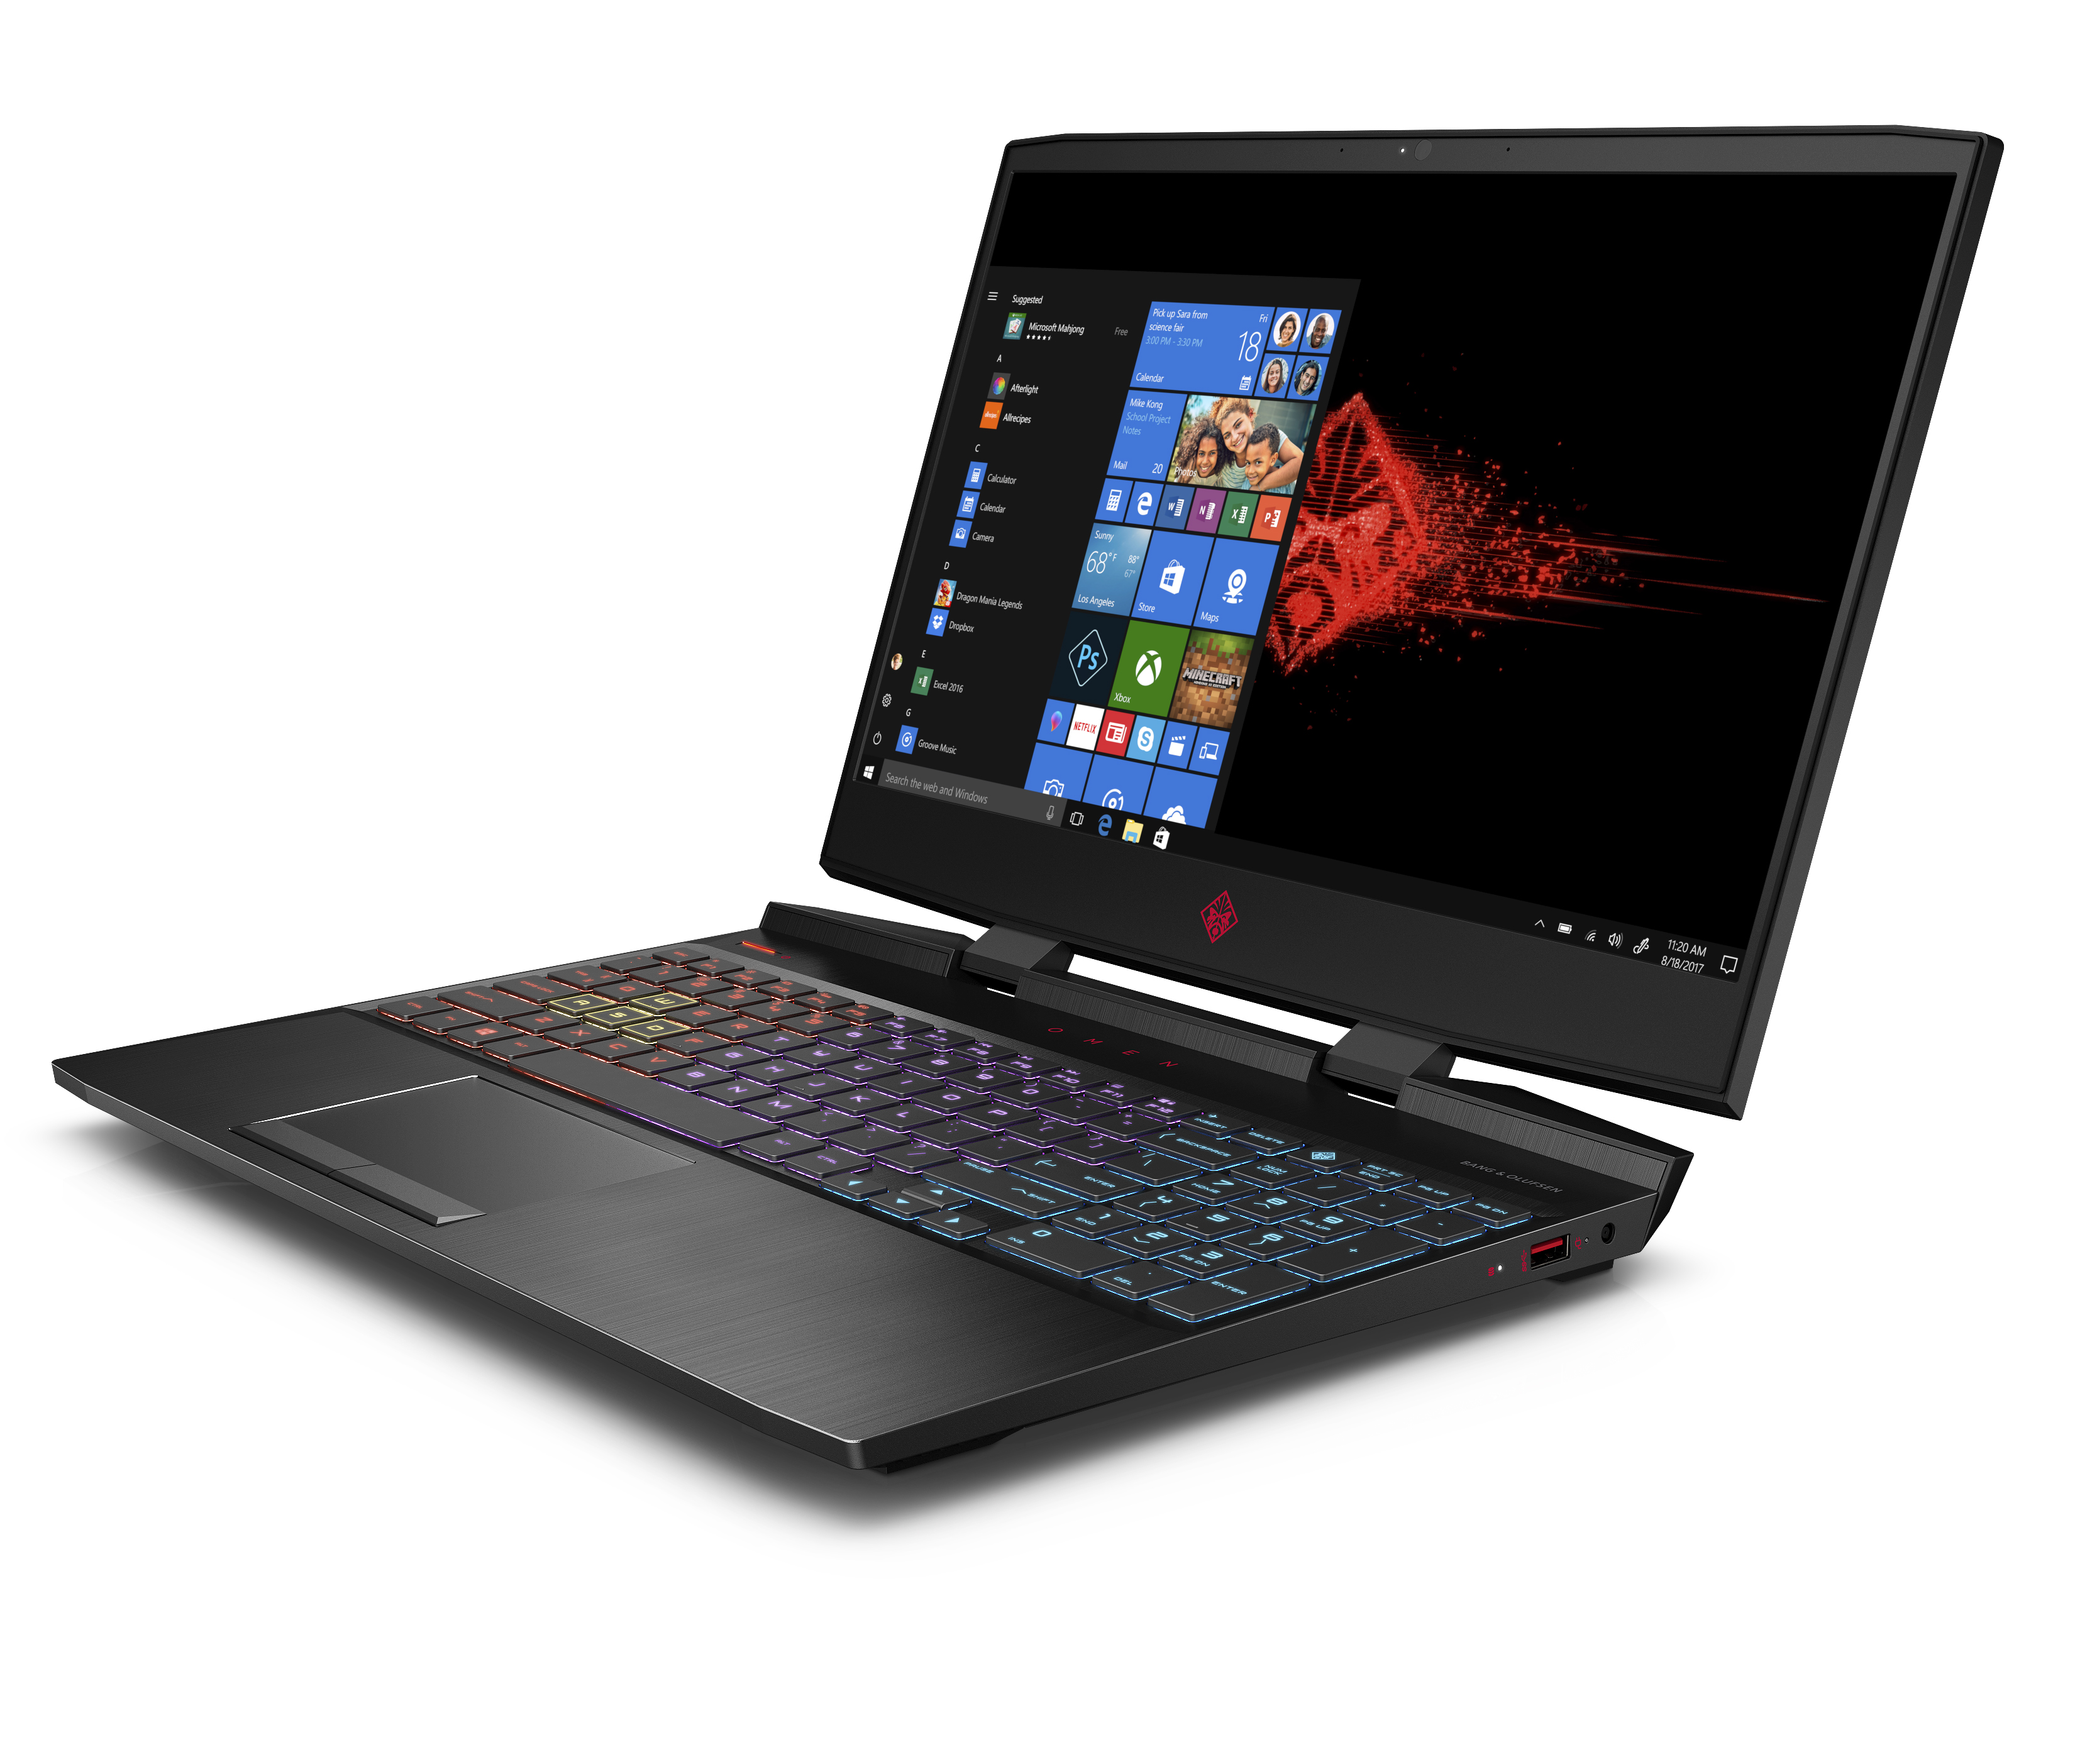 Omen by HP Gaming Laptop 15.6", Intel Core i7-9750H, NVIDIA GTX 1660Ti 6GB, 16GB RAM, 256GB SSD, Omen Headset and Mouse Included ($100 Value), 15-dc1088wm - image 3 of 9